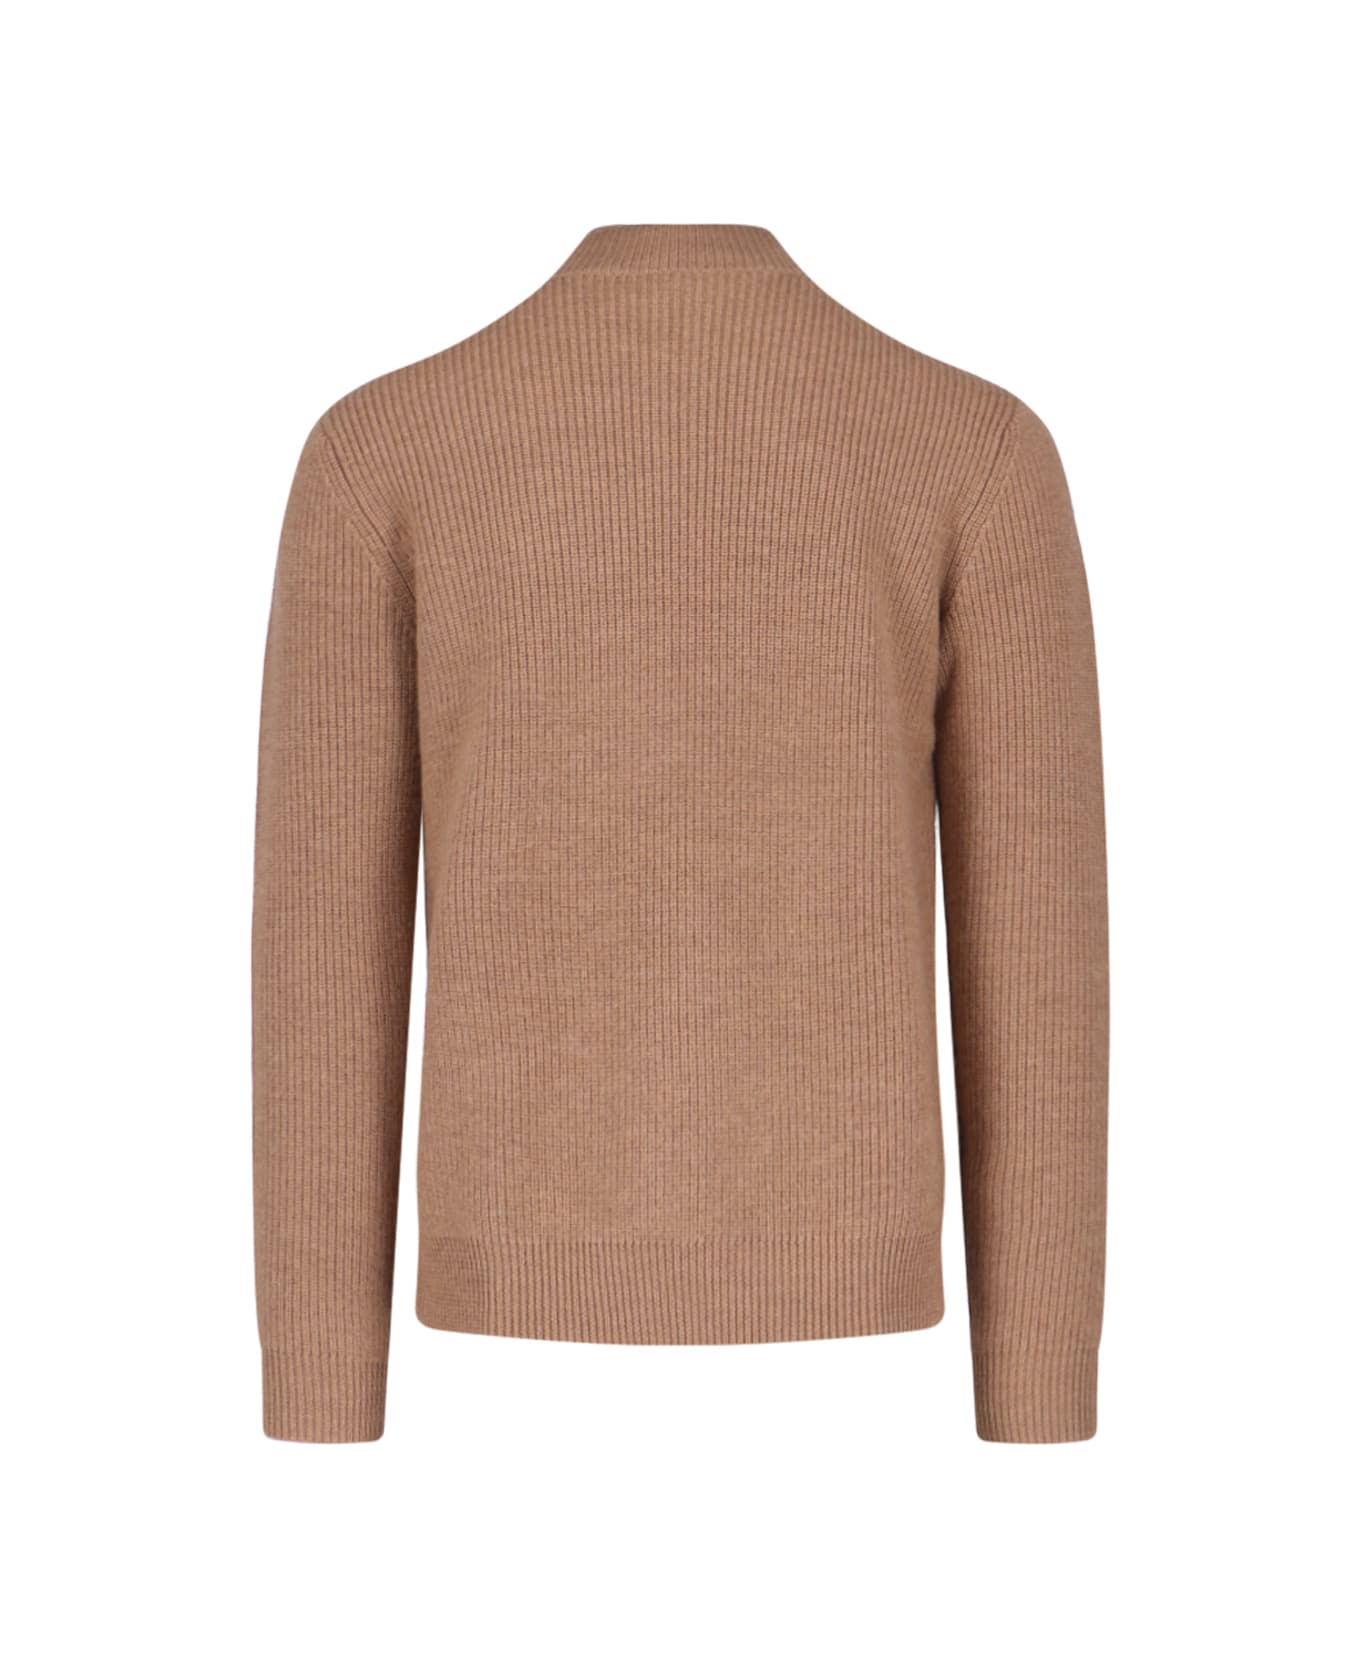 J.W. Anderson High Neck Sweater - Brown